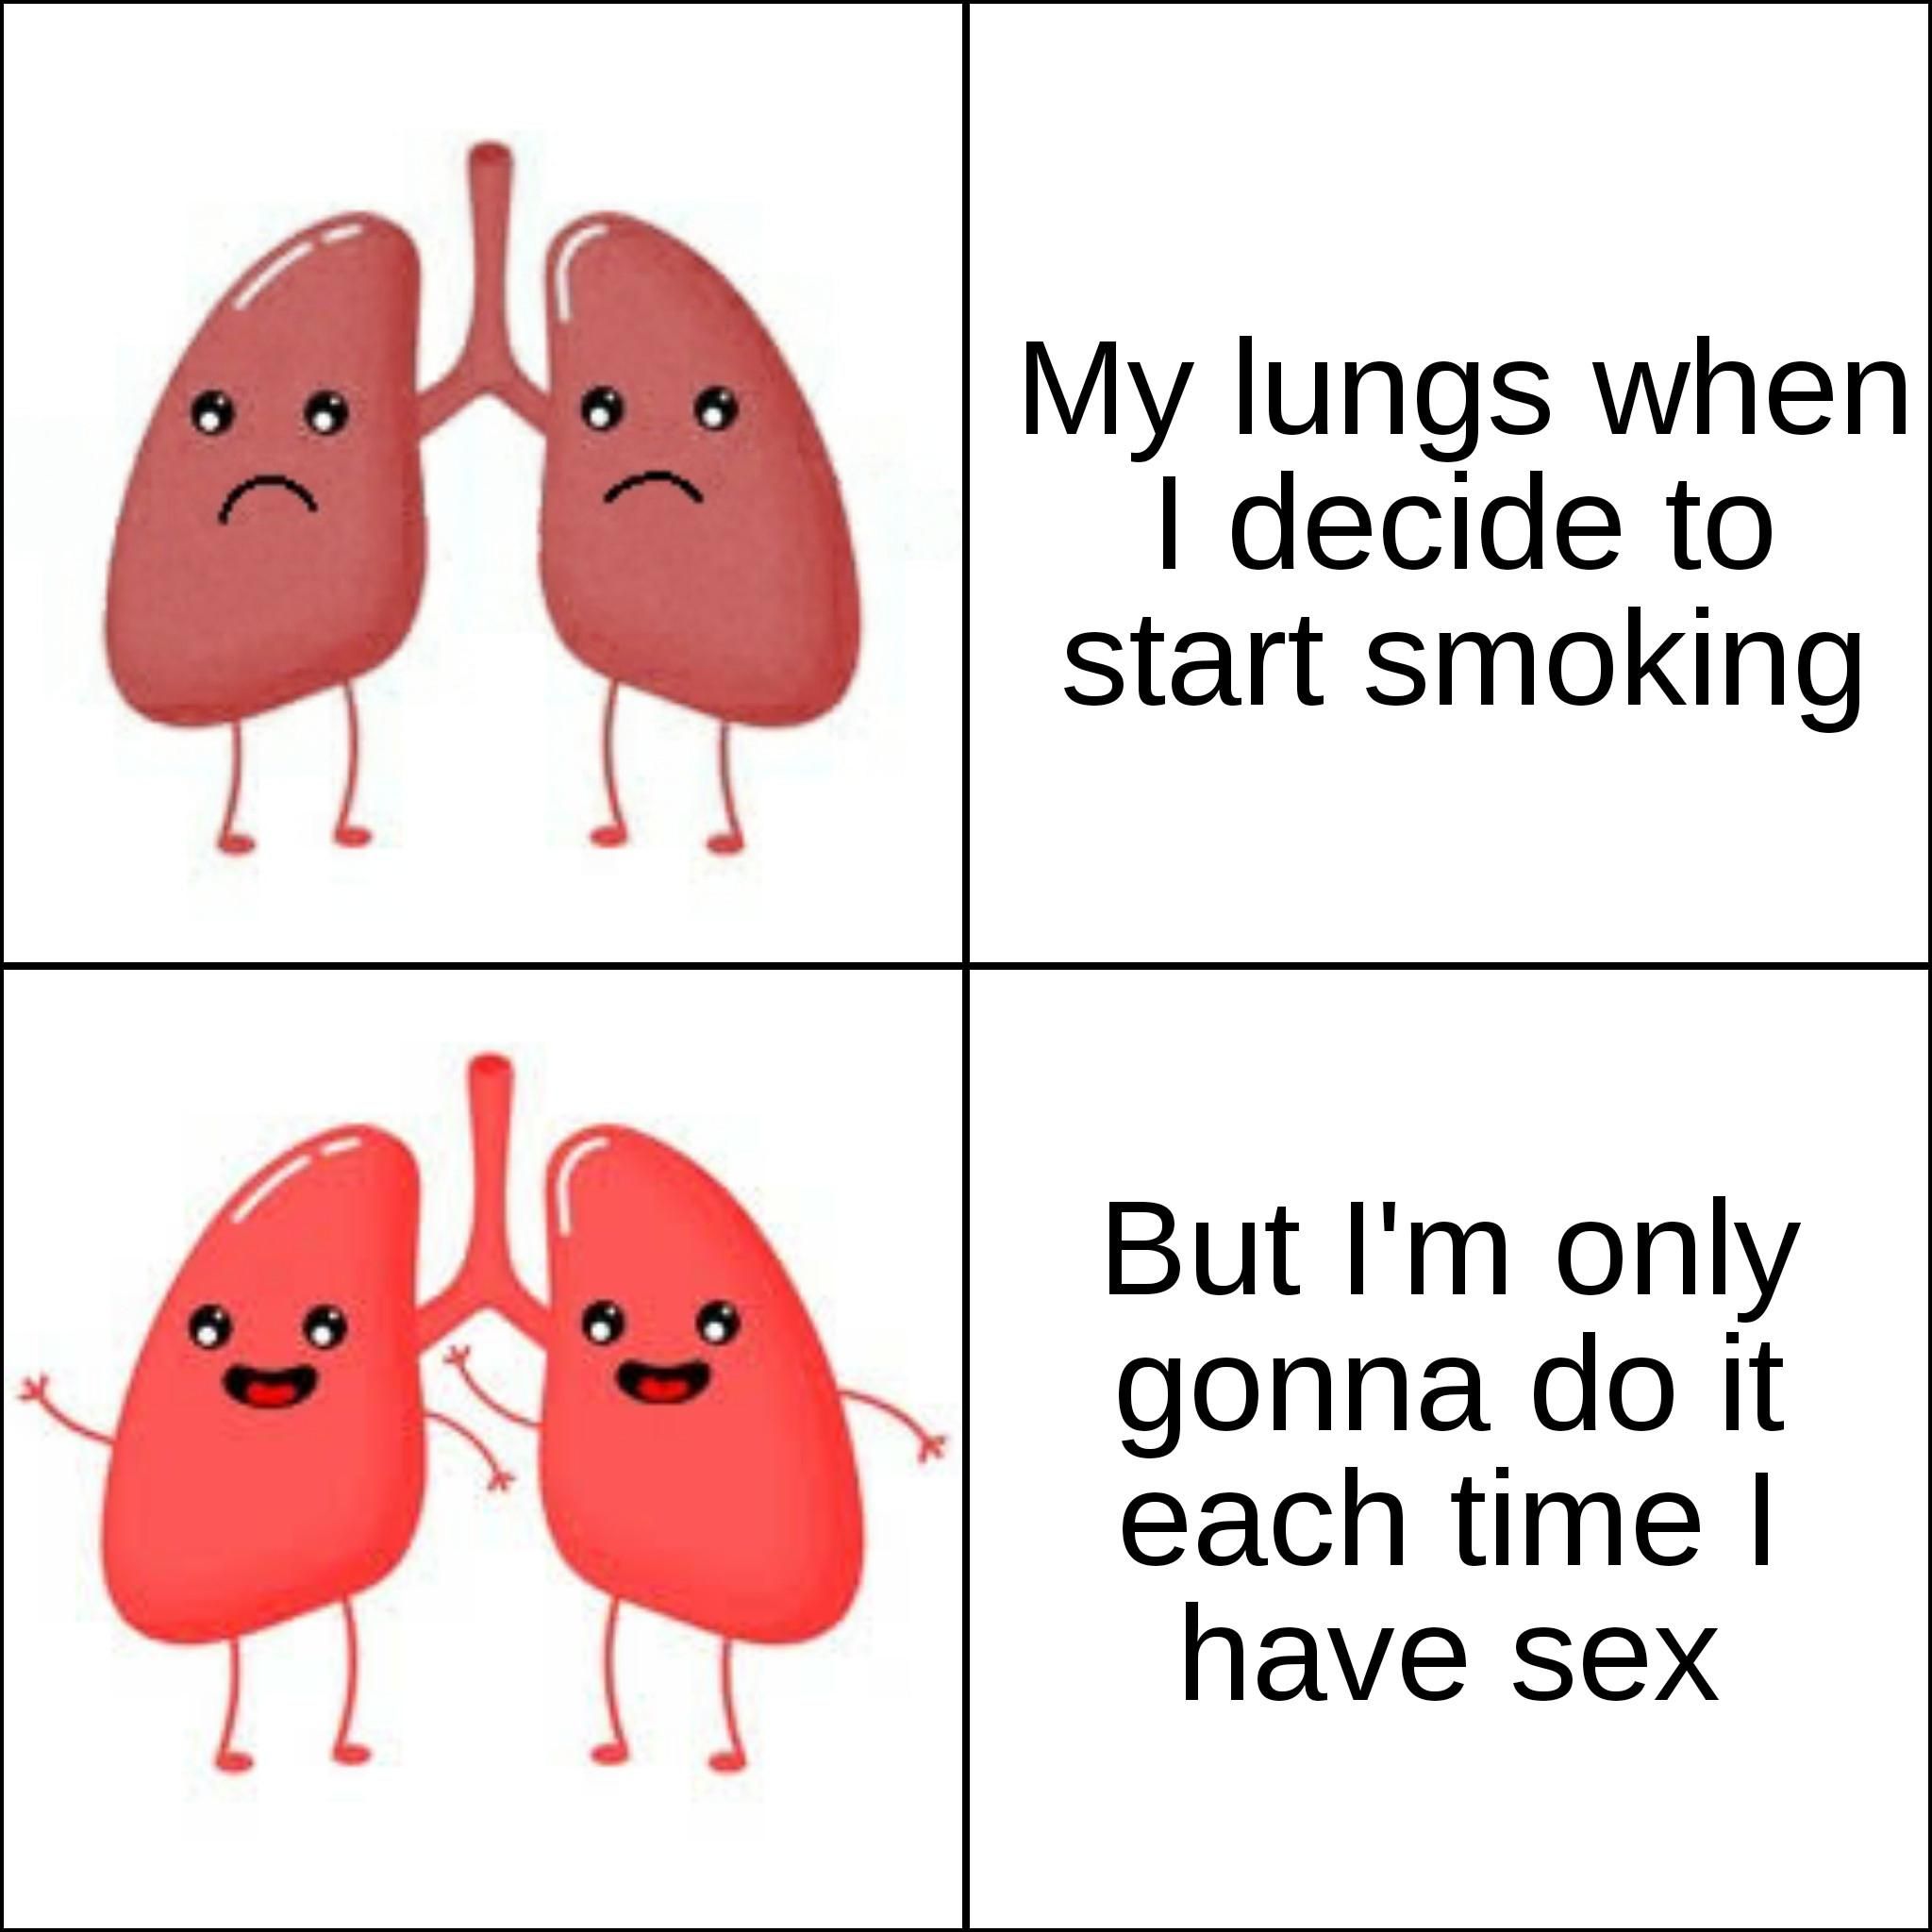 Atleast my lungs are happy